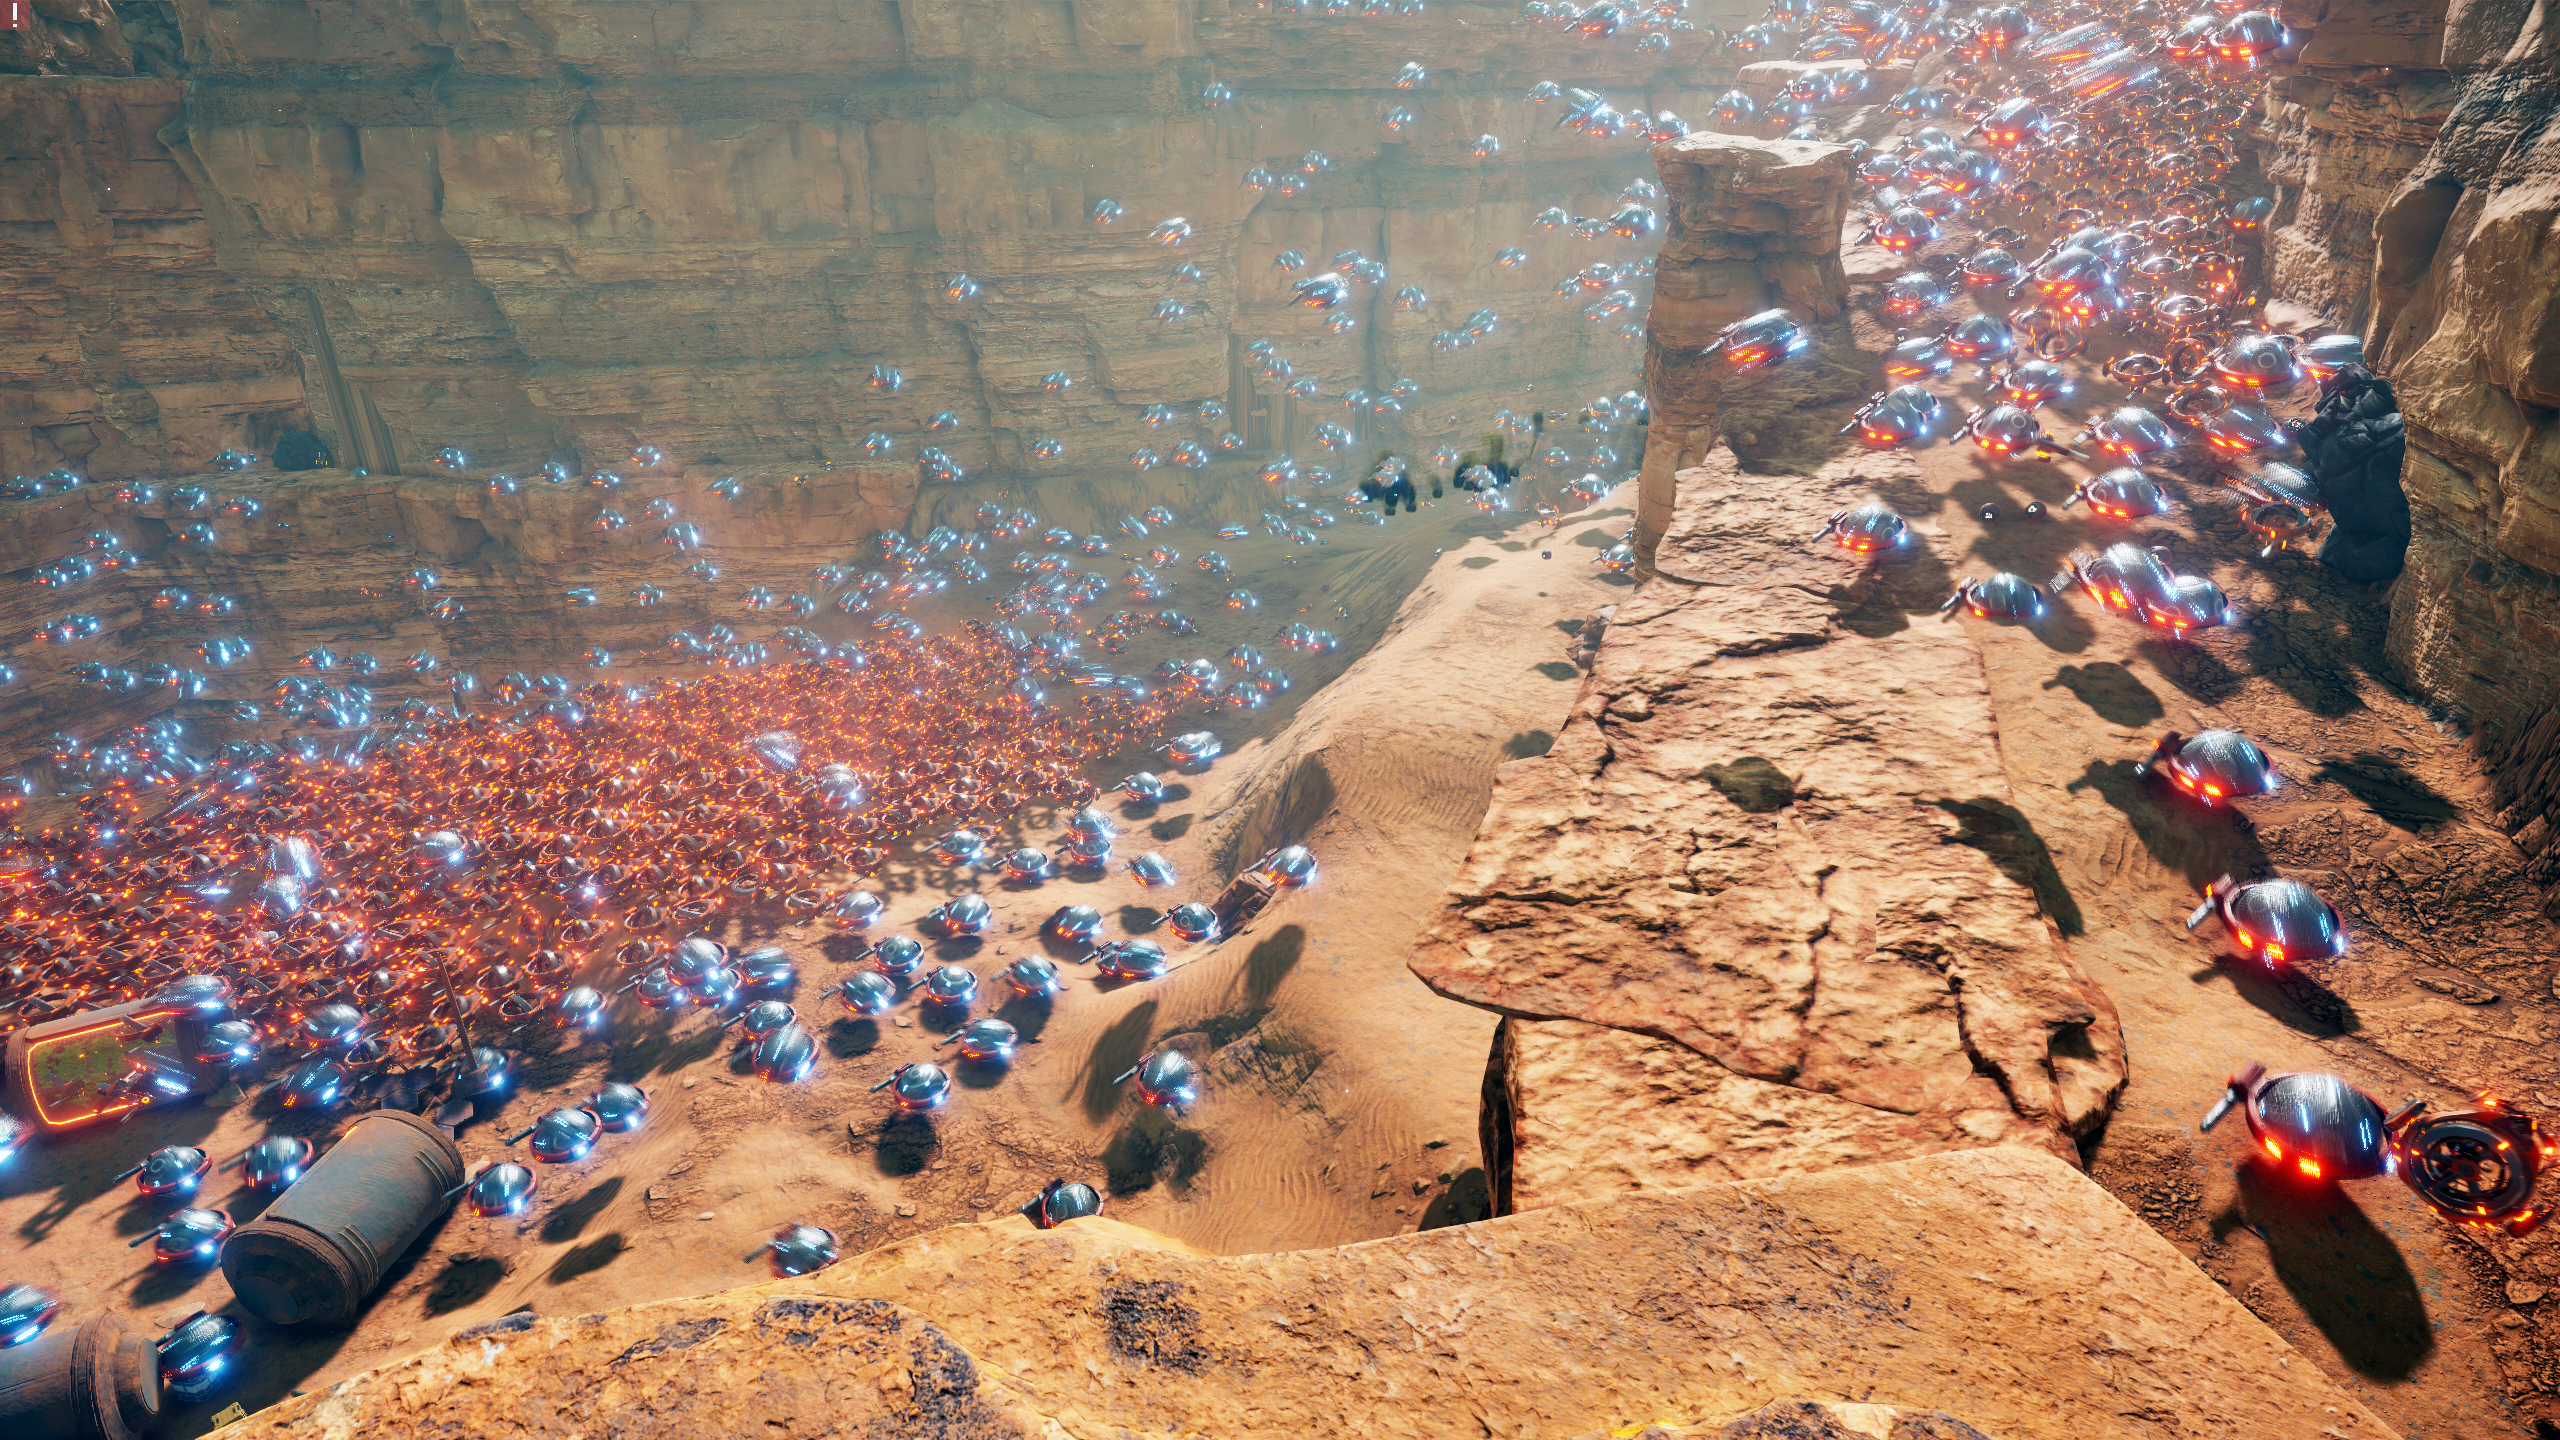 Up to 5,000 individual physics-based enemies can flood the player’s Martian factories at once.